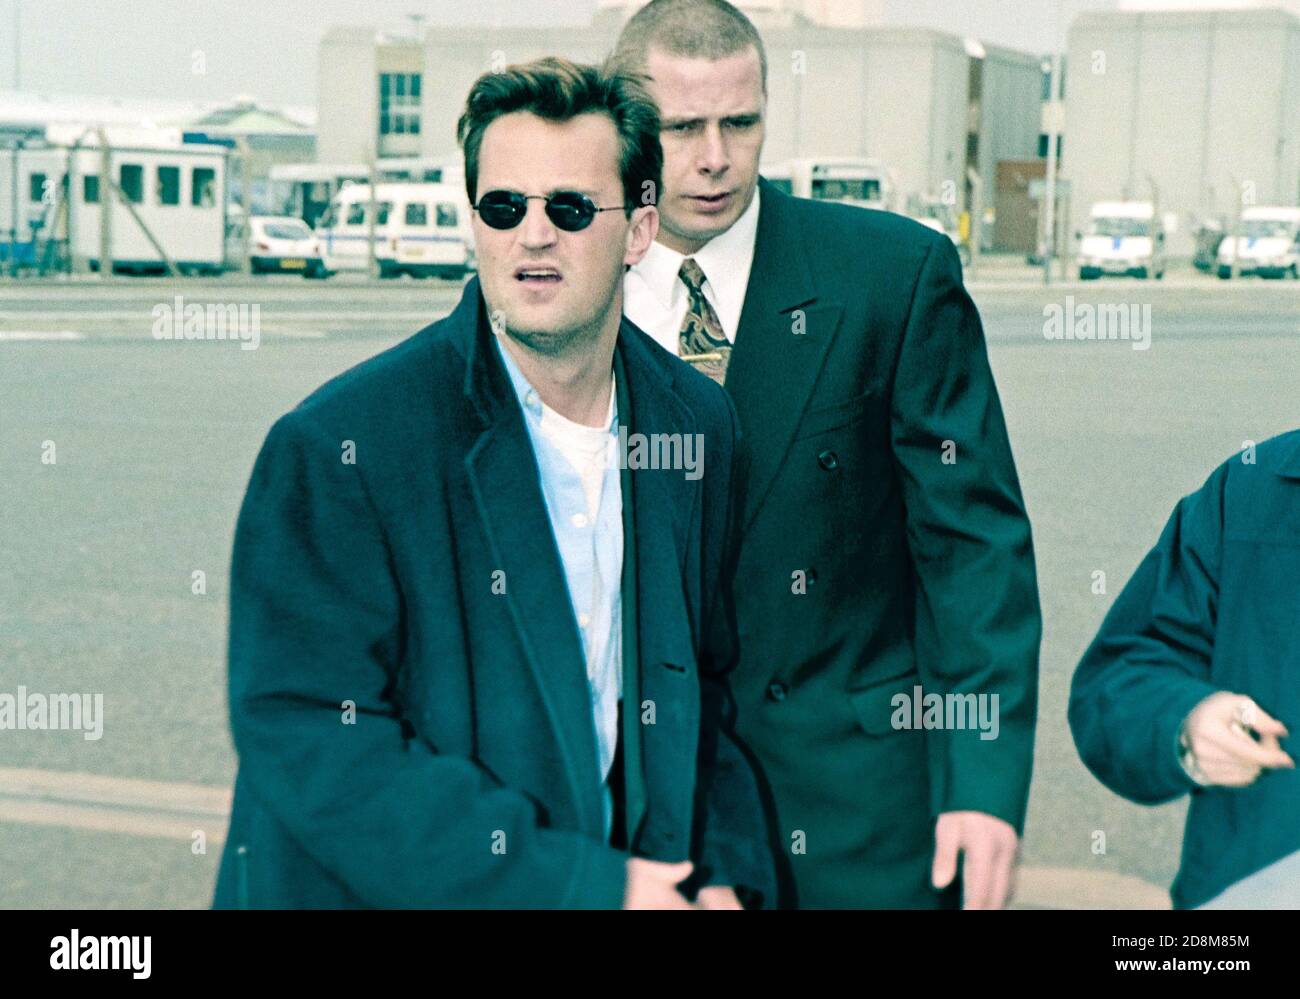 Cast of the TV series 'Friends' arriving at Heathrow Airport March 1998 Stock Photo